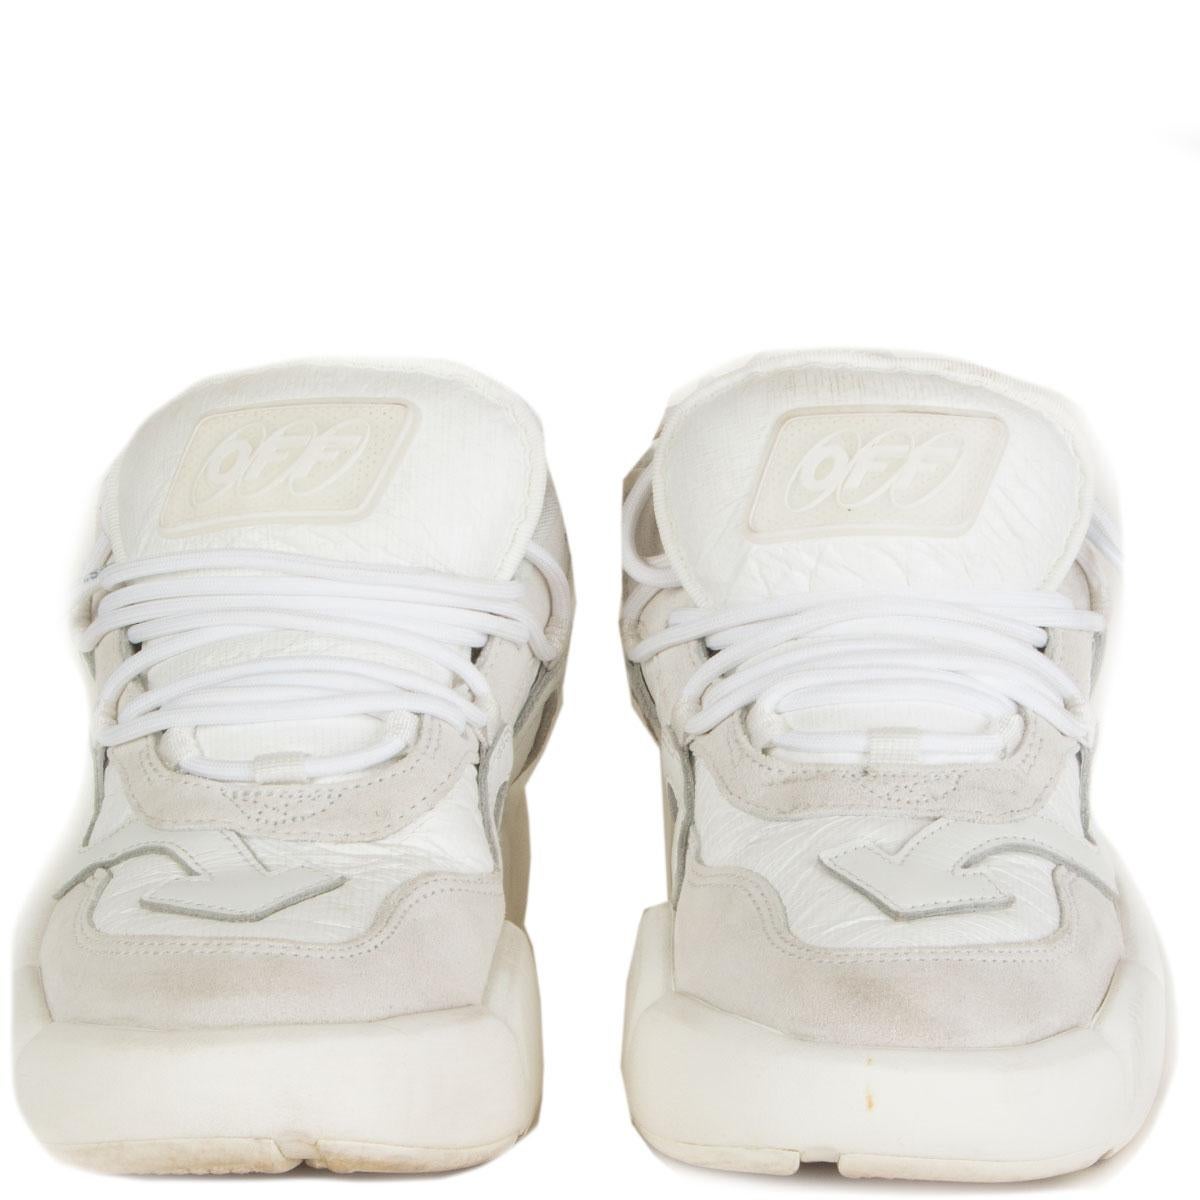 100% authentic  OFF-WHITE c/o Virgil Abloh Optic Chlorine mid-top sneakers in white technical textile, pvc, mesh and light grey suede featuring a cloudy rubber sole and faux leather arrow detail. Have been worn with faint darkening to the white